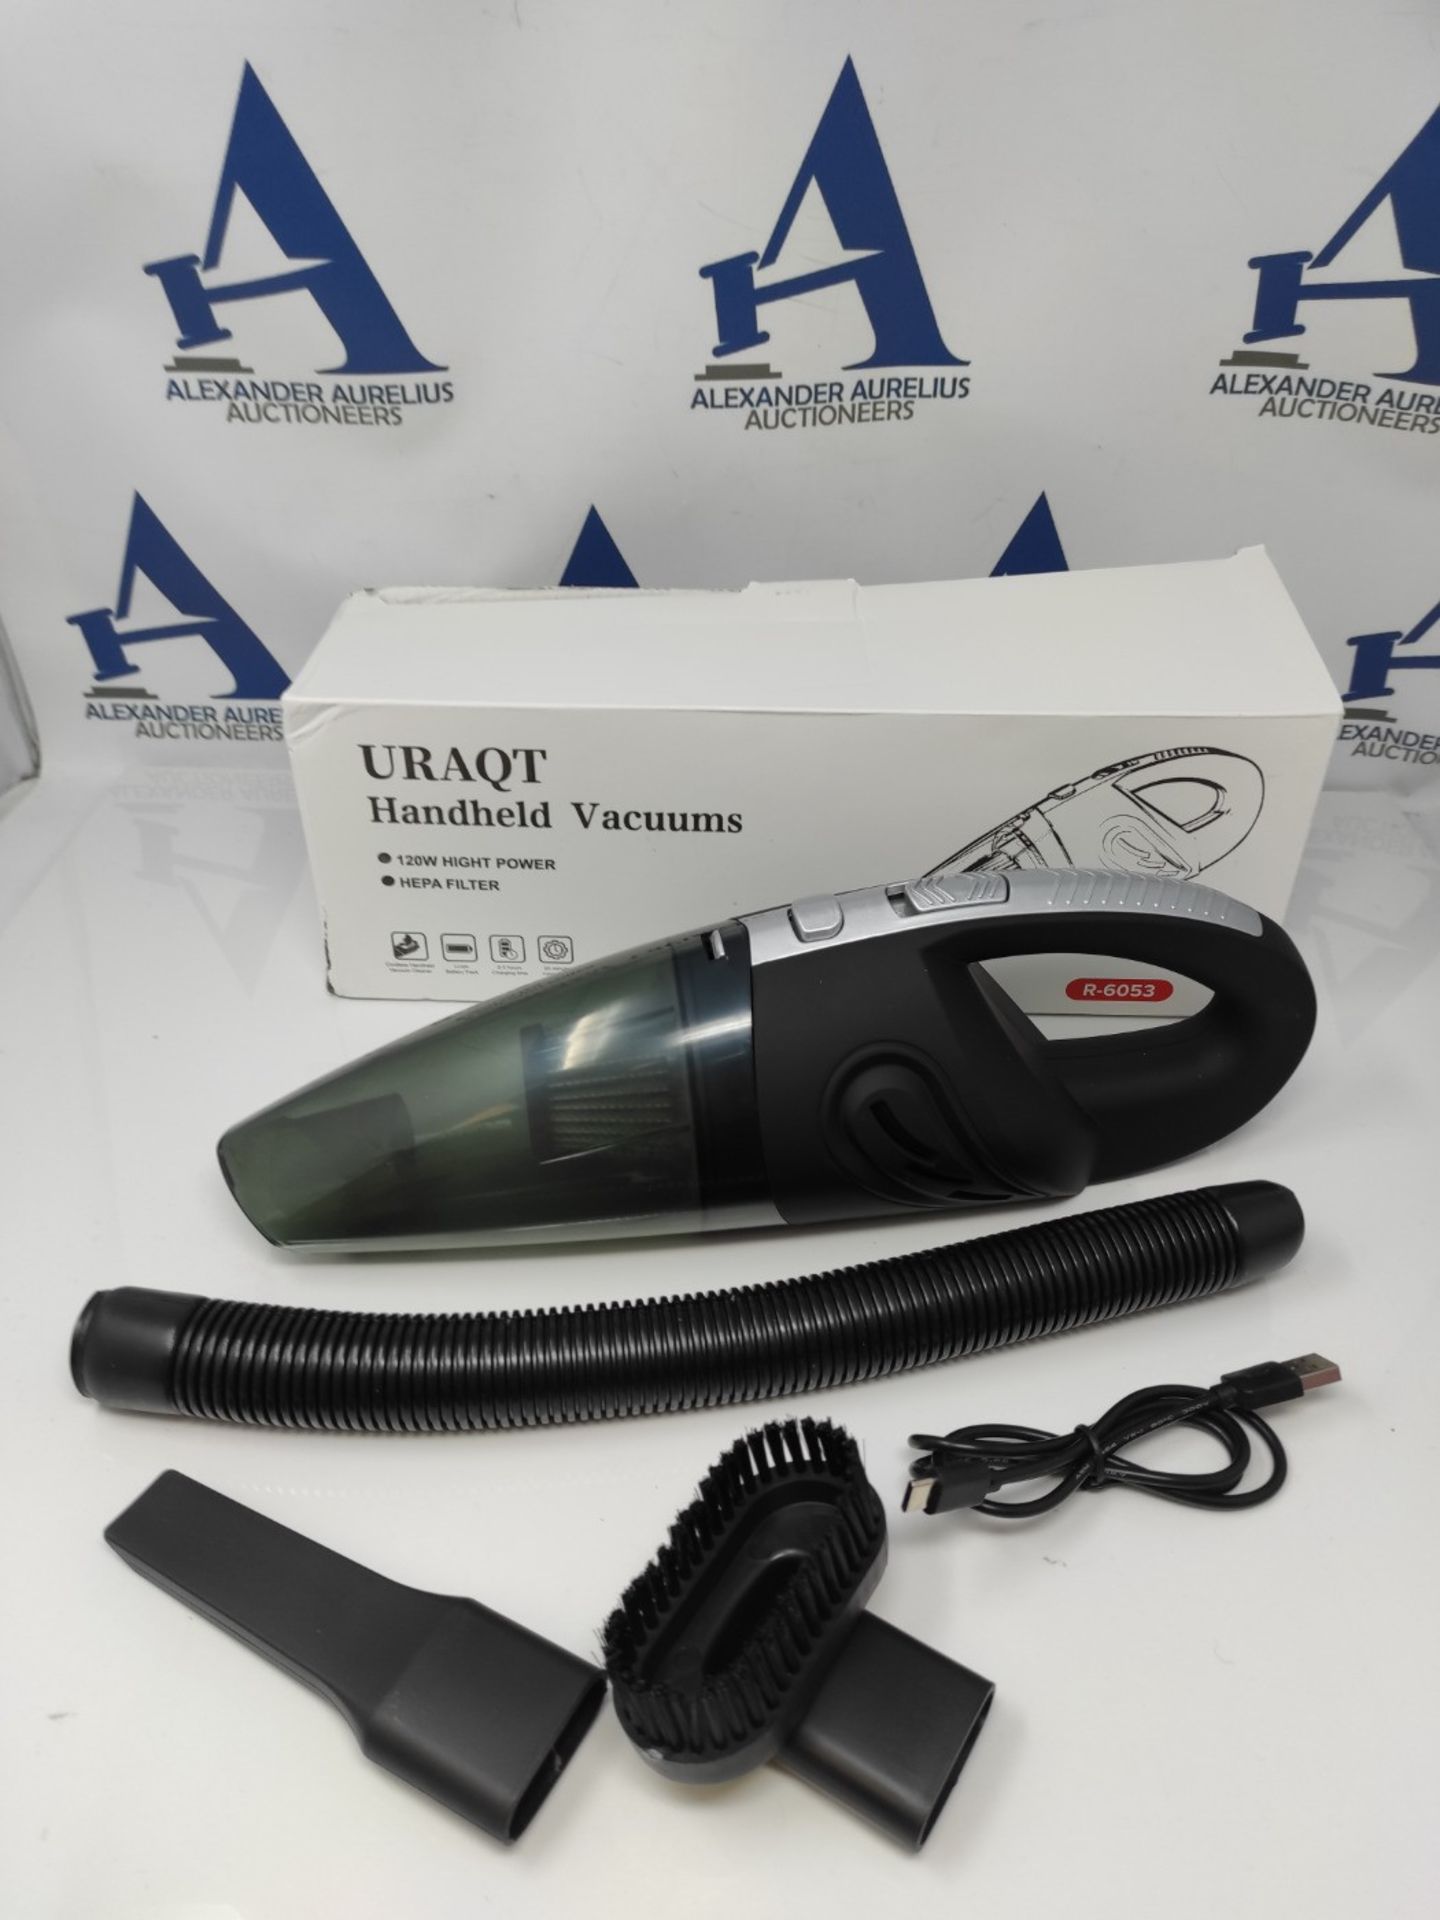 URAQT Handheld Lightweight Wet Dry Vacuum Cleaner Cordless, 120W with Powerful Suction